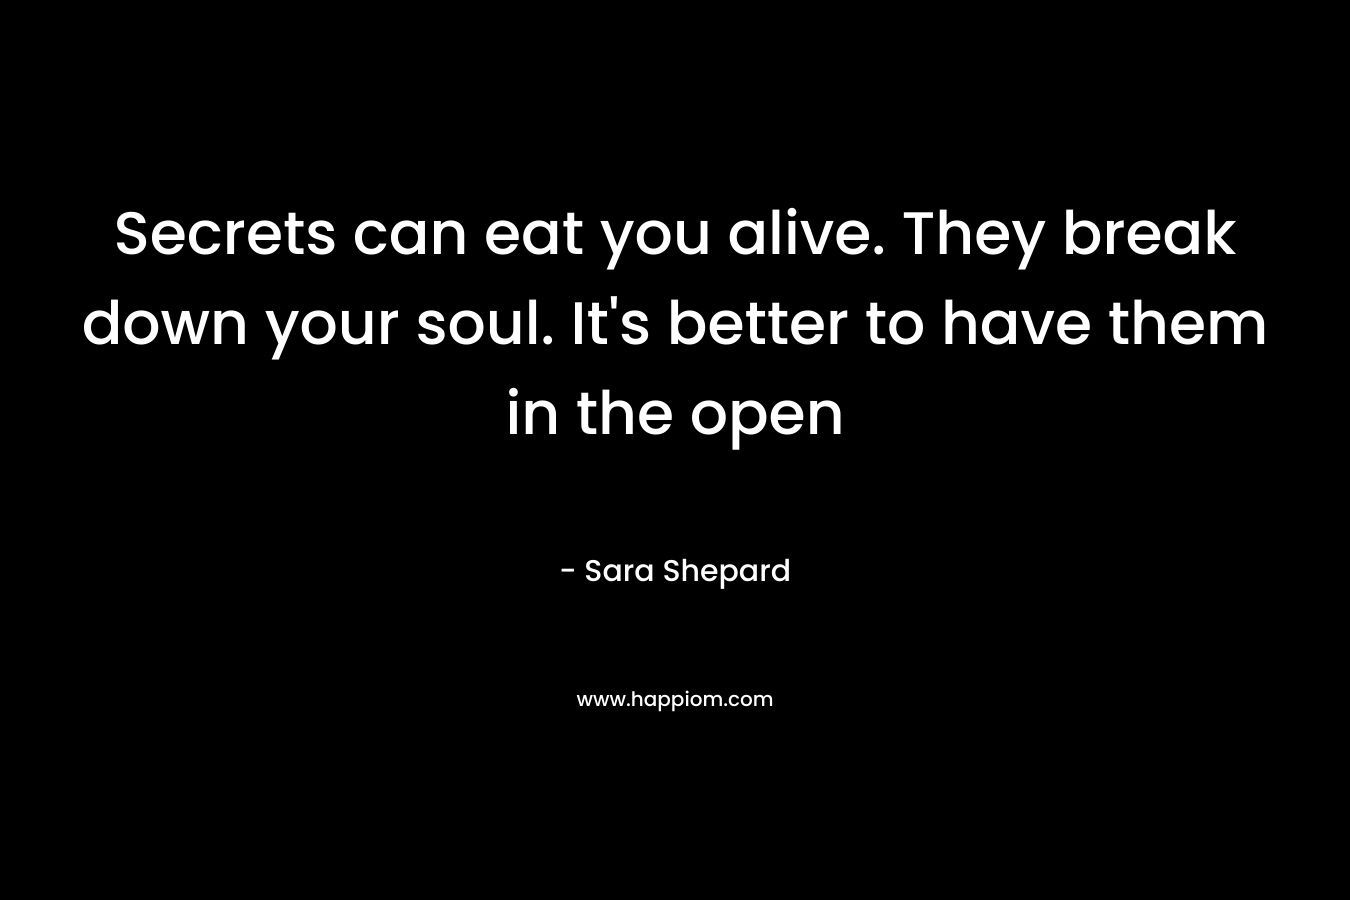 Secrets can eat you alive. They break down your soul. It's better to have them in the open